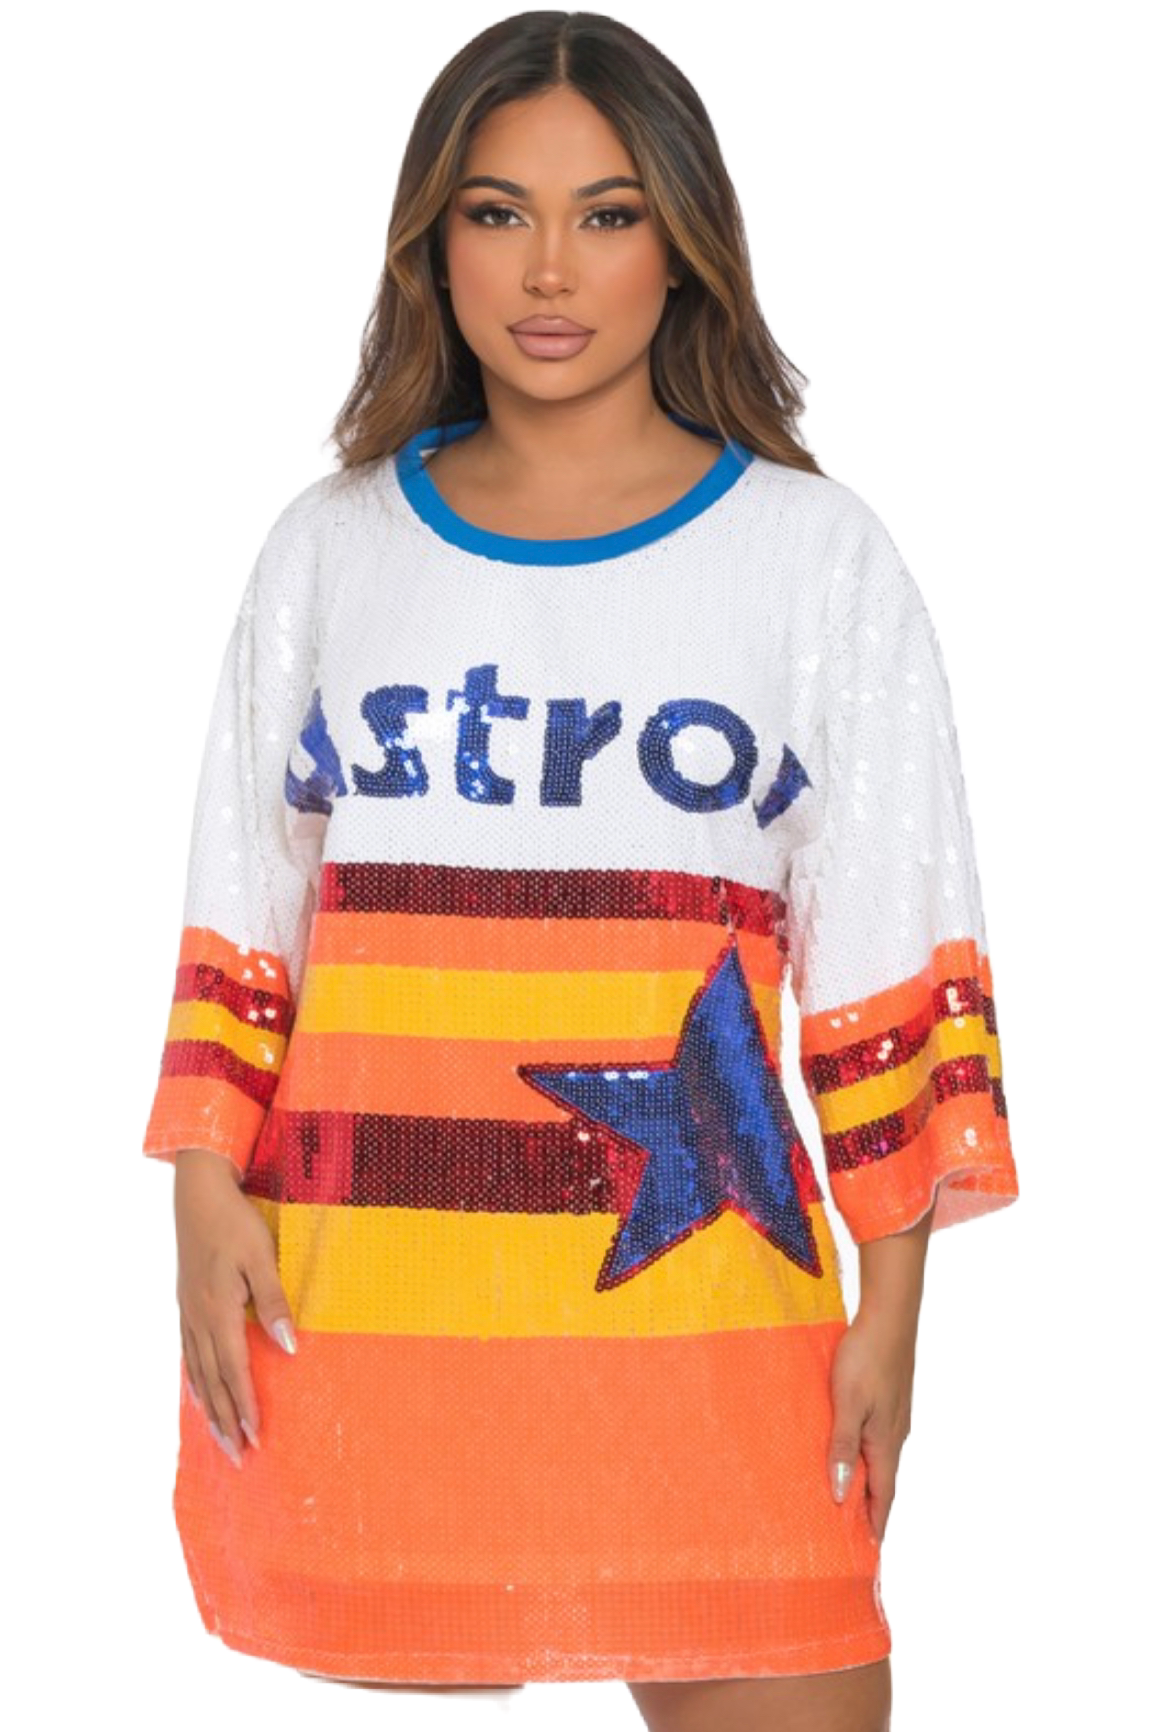 astros jersey outfit womens